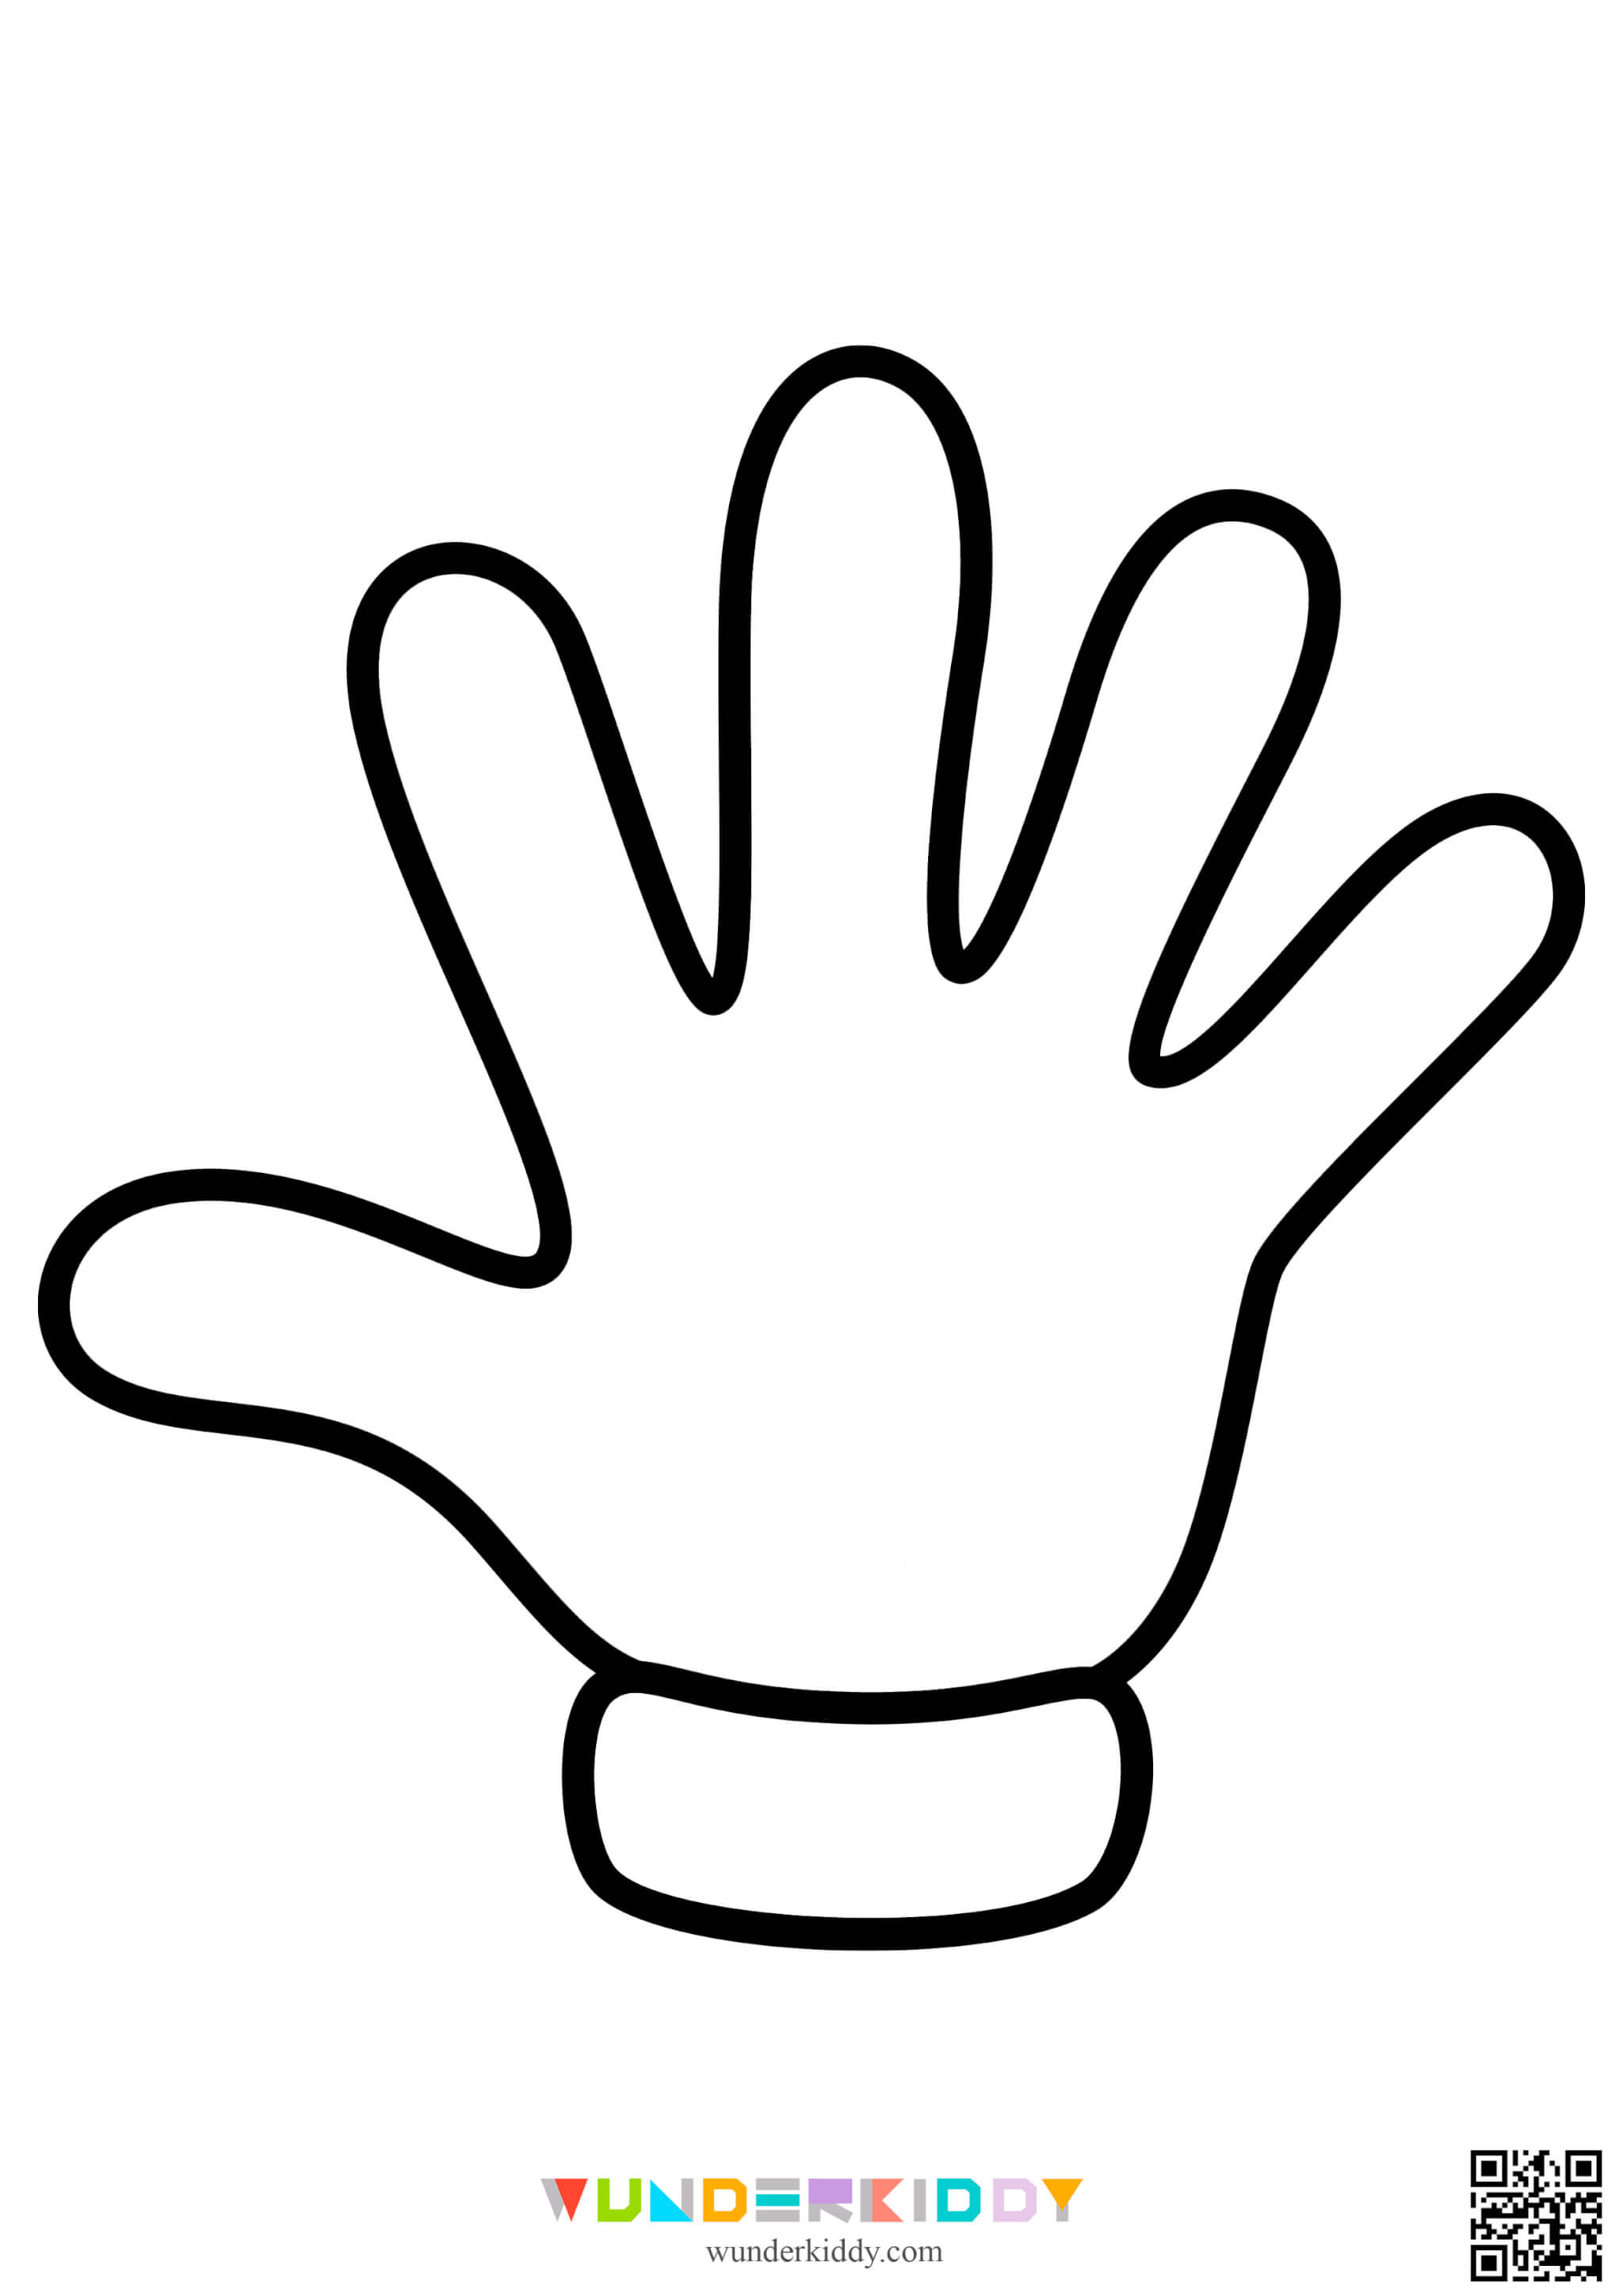 Printable Hands Template - Image 6